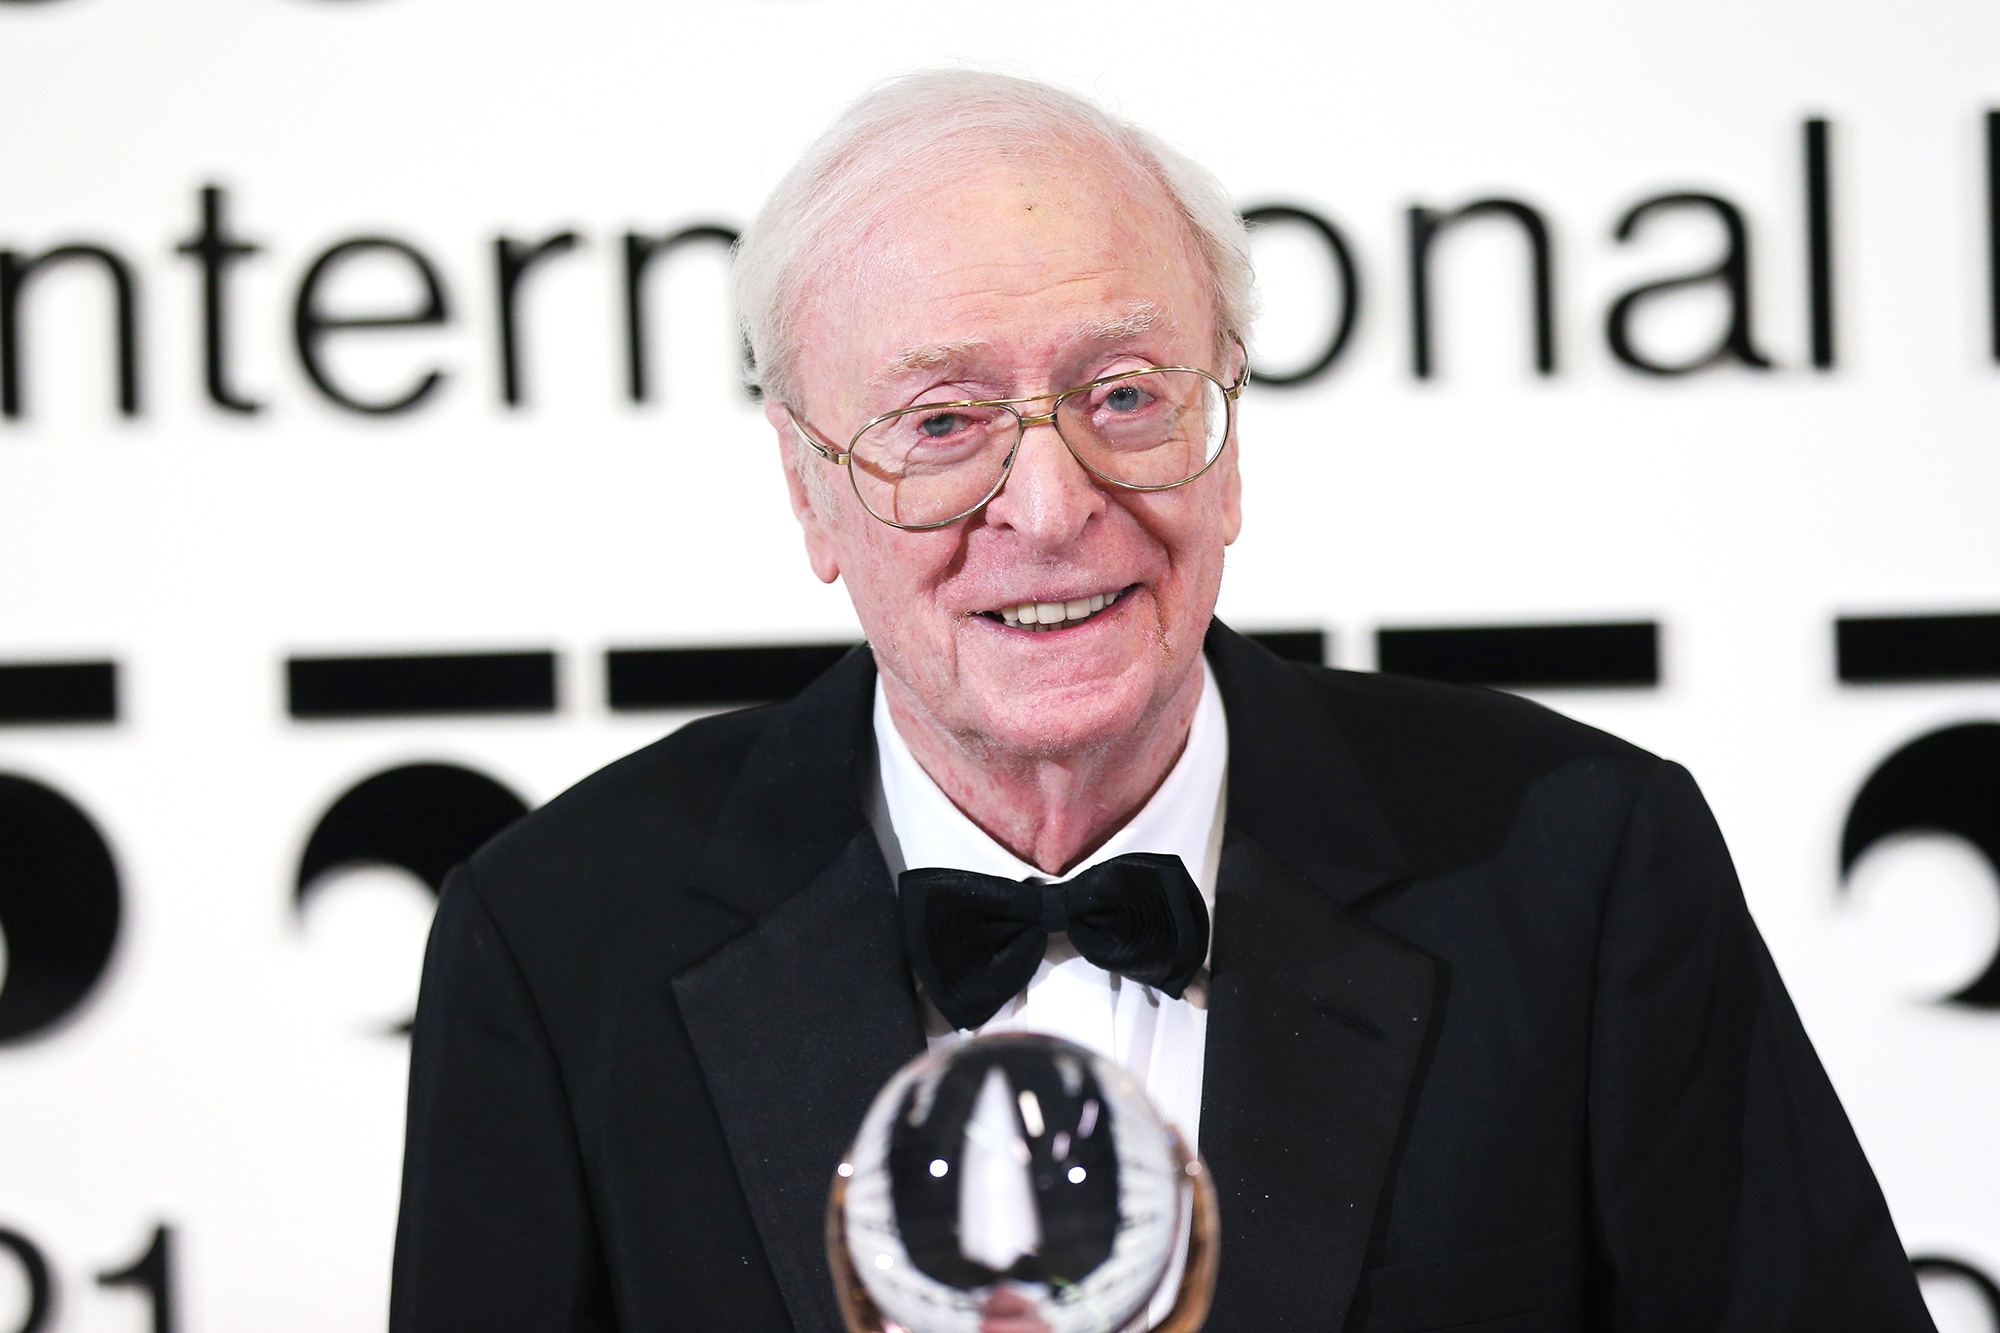 Michael Caine clarifies statement on retiring after latest film